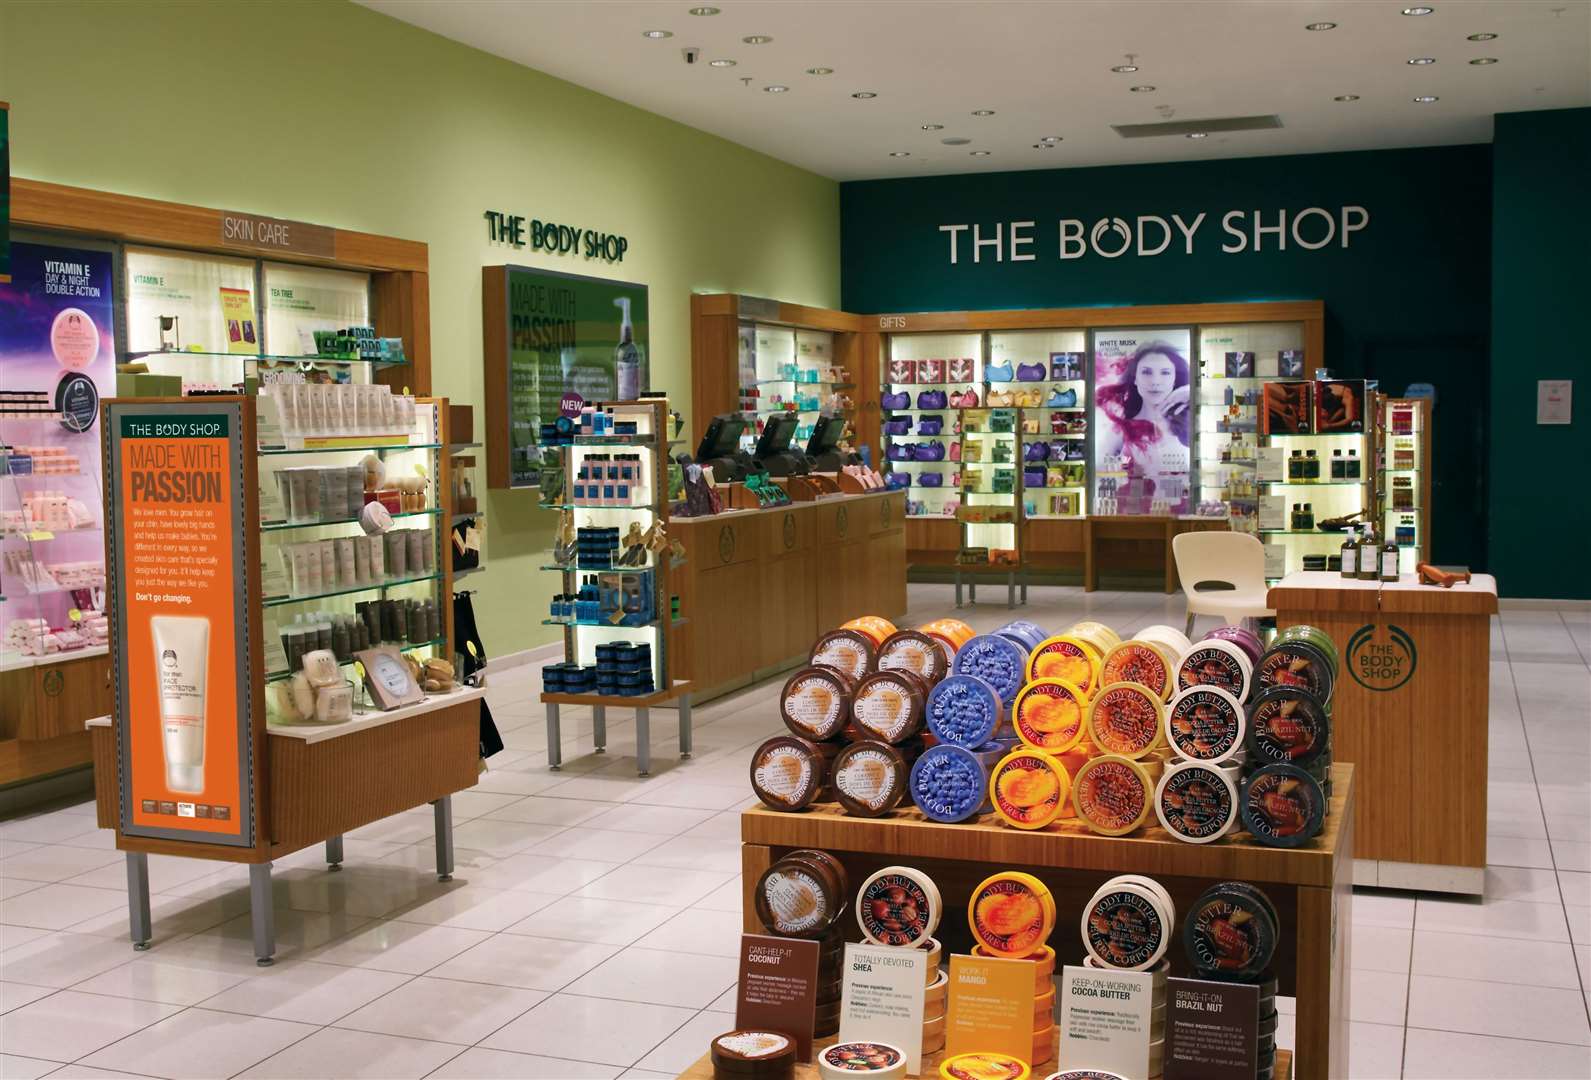 The Body Shop has been a familiar face on the high street for decades